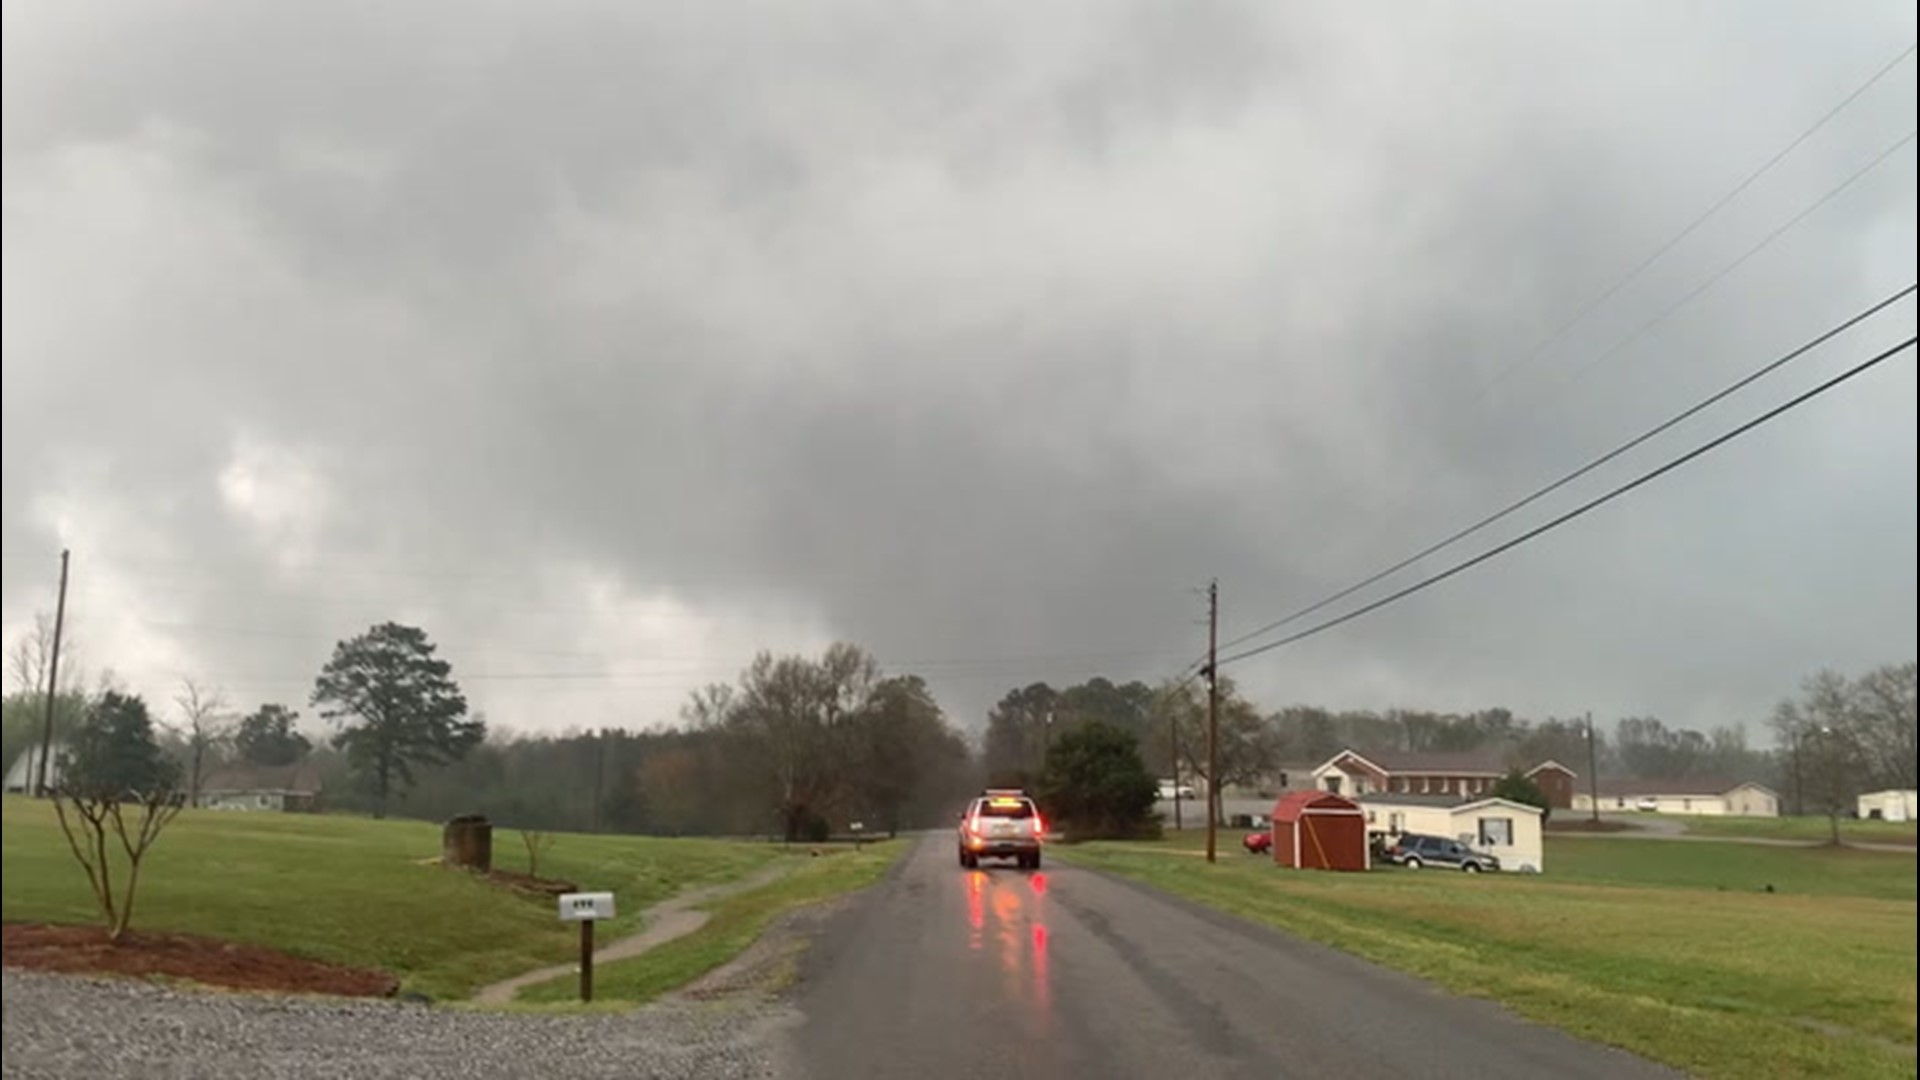 AccuWeather's Bill Wadell shot this video of a tornado that crossed in front of him near Cooper, Alabama, during a tornado-warned storm on March 17.